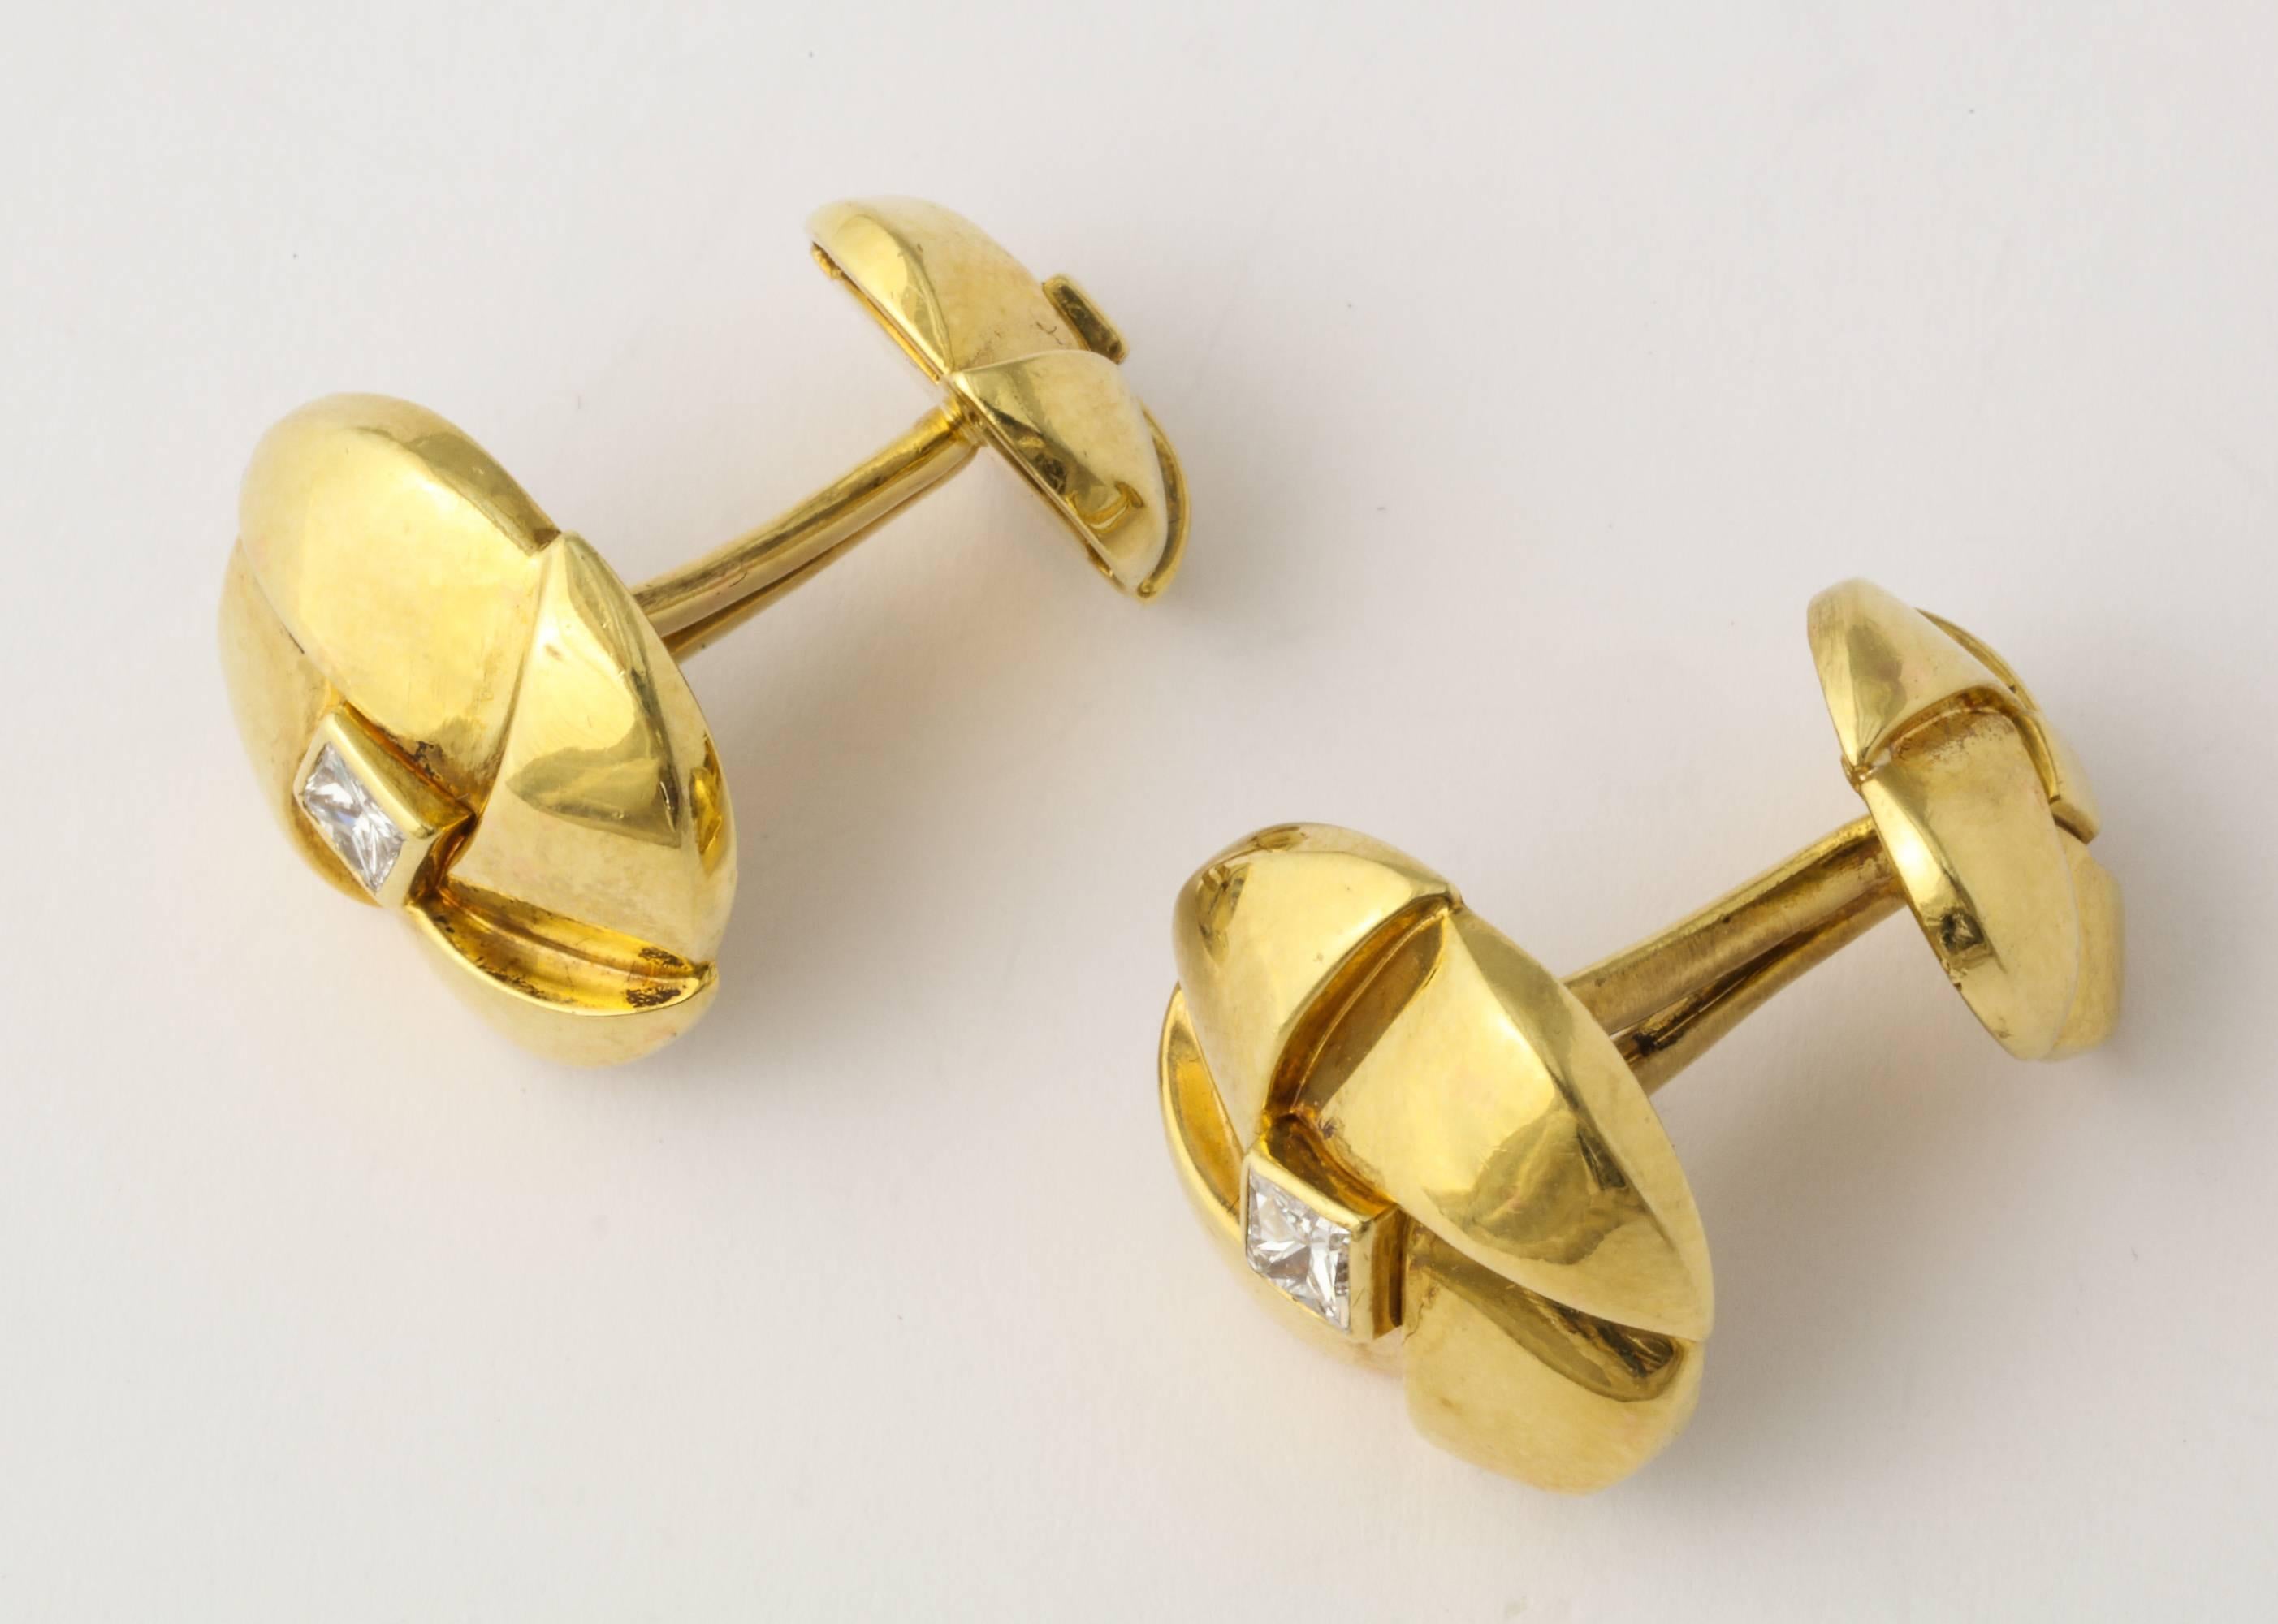 A handsome pair of Jose Hess cuff links of 18K gold, set with square cut diamonds. .855 grams. 3/4 inches Diameter. Gold, and Jose Hess marks.